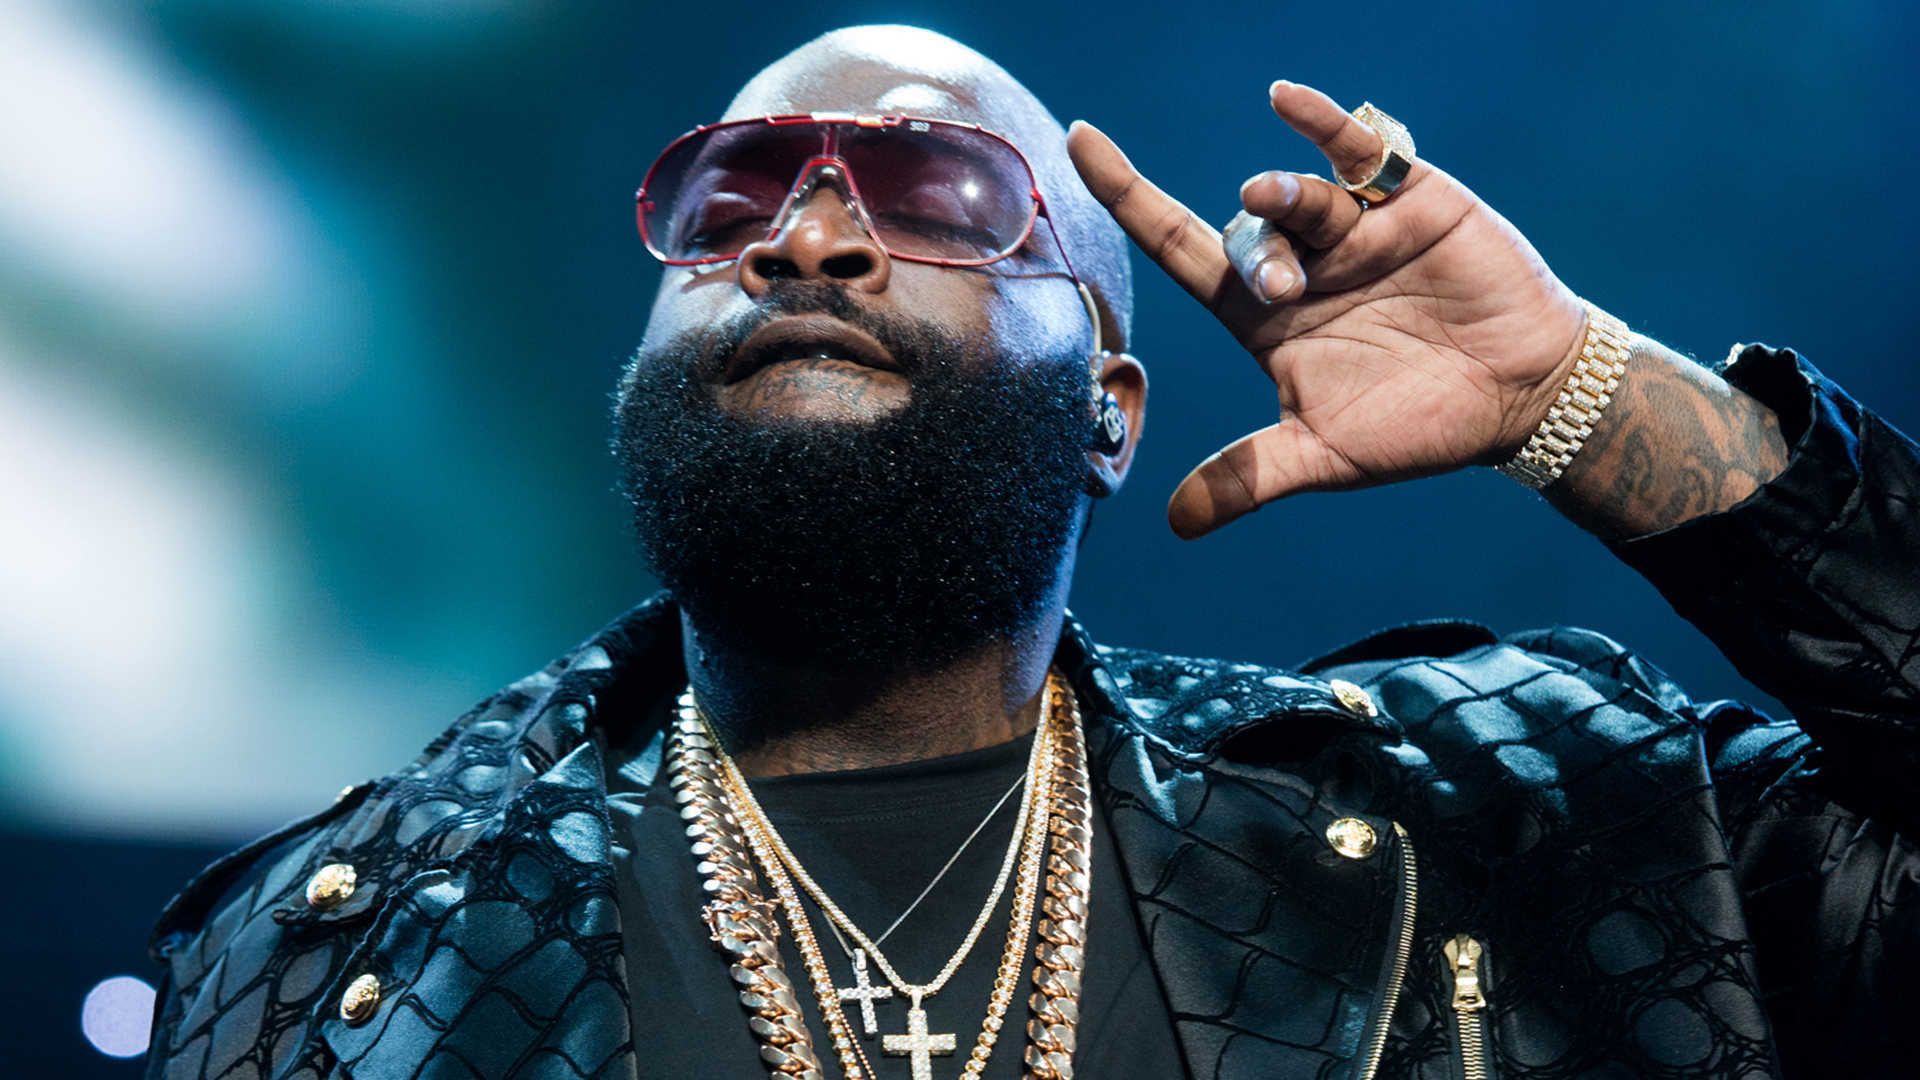 Rick Ross Wallpapers - Top Free Rick Ross Backgrounds 1920x1080